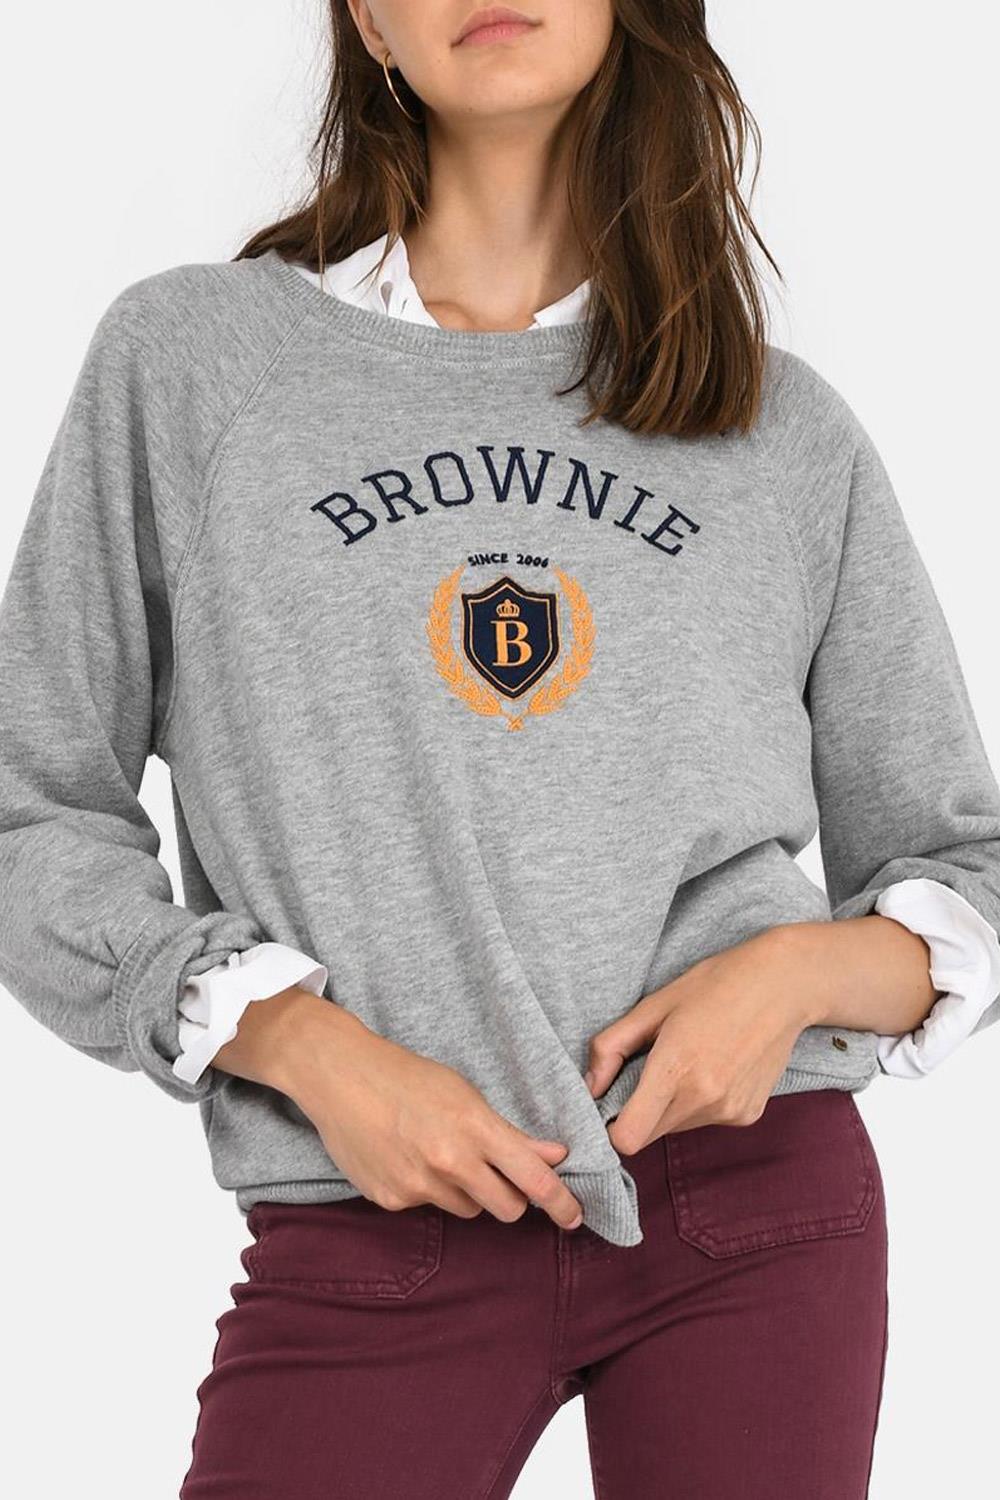 looks sudadera 21 buttons influencers Brownie, 35,90€